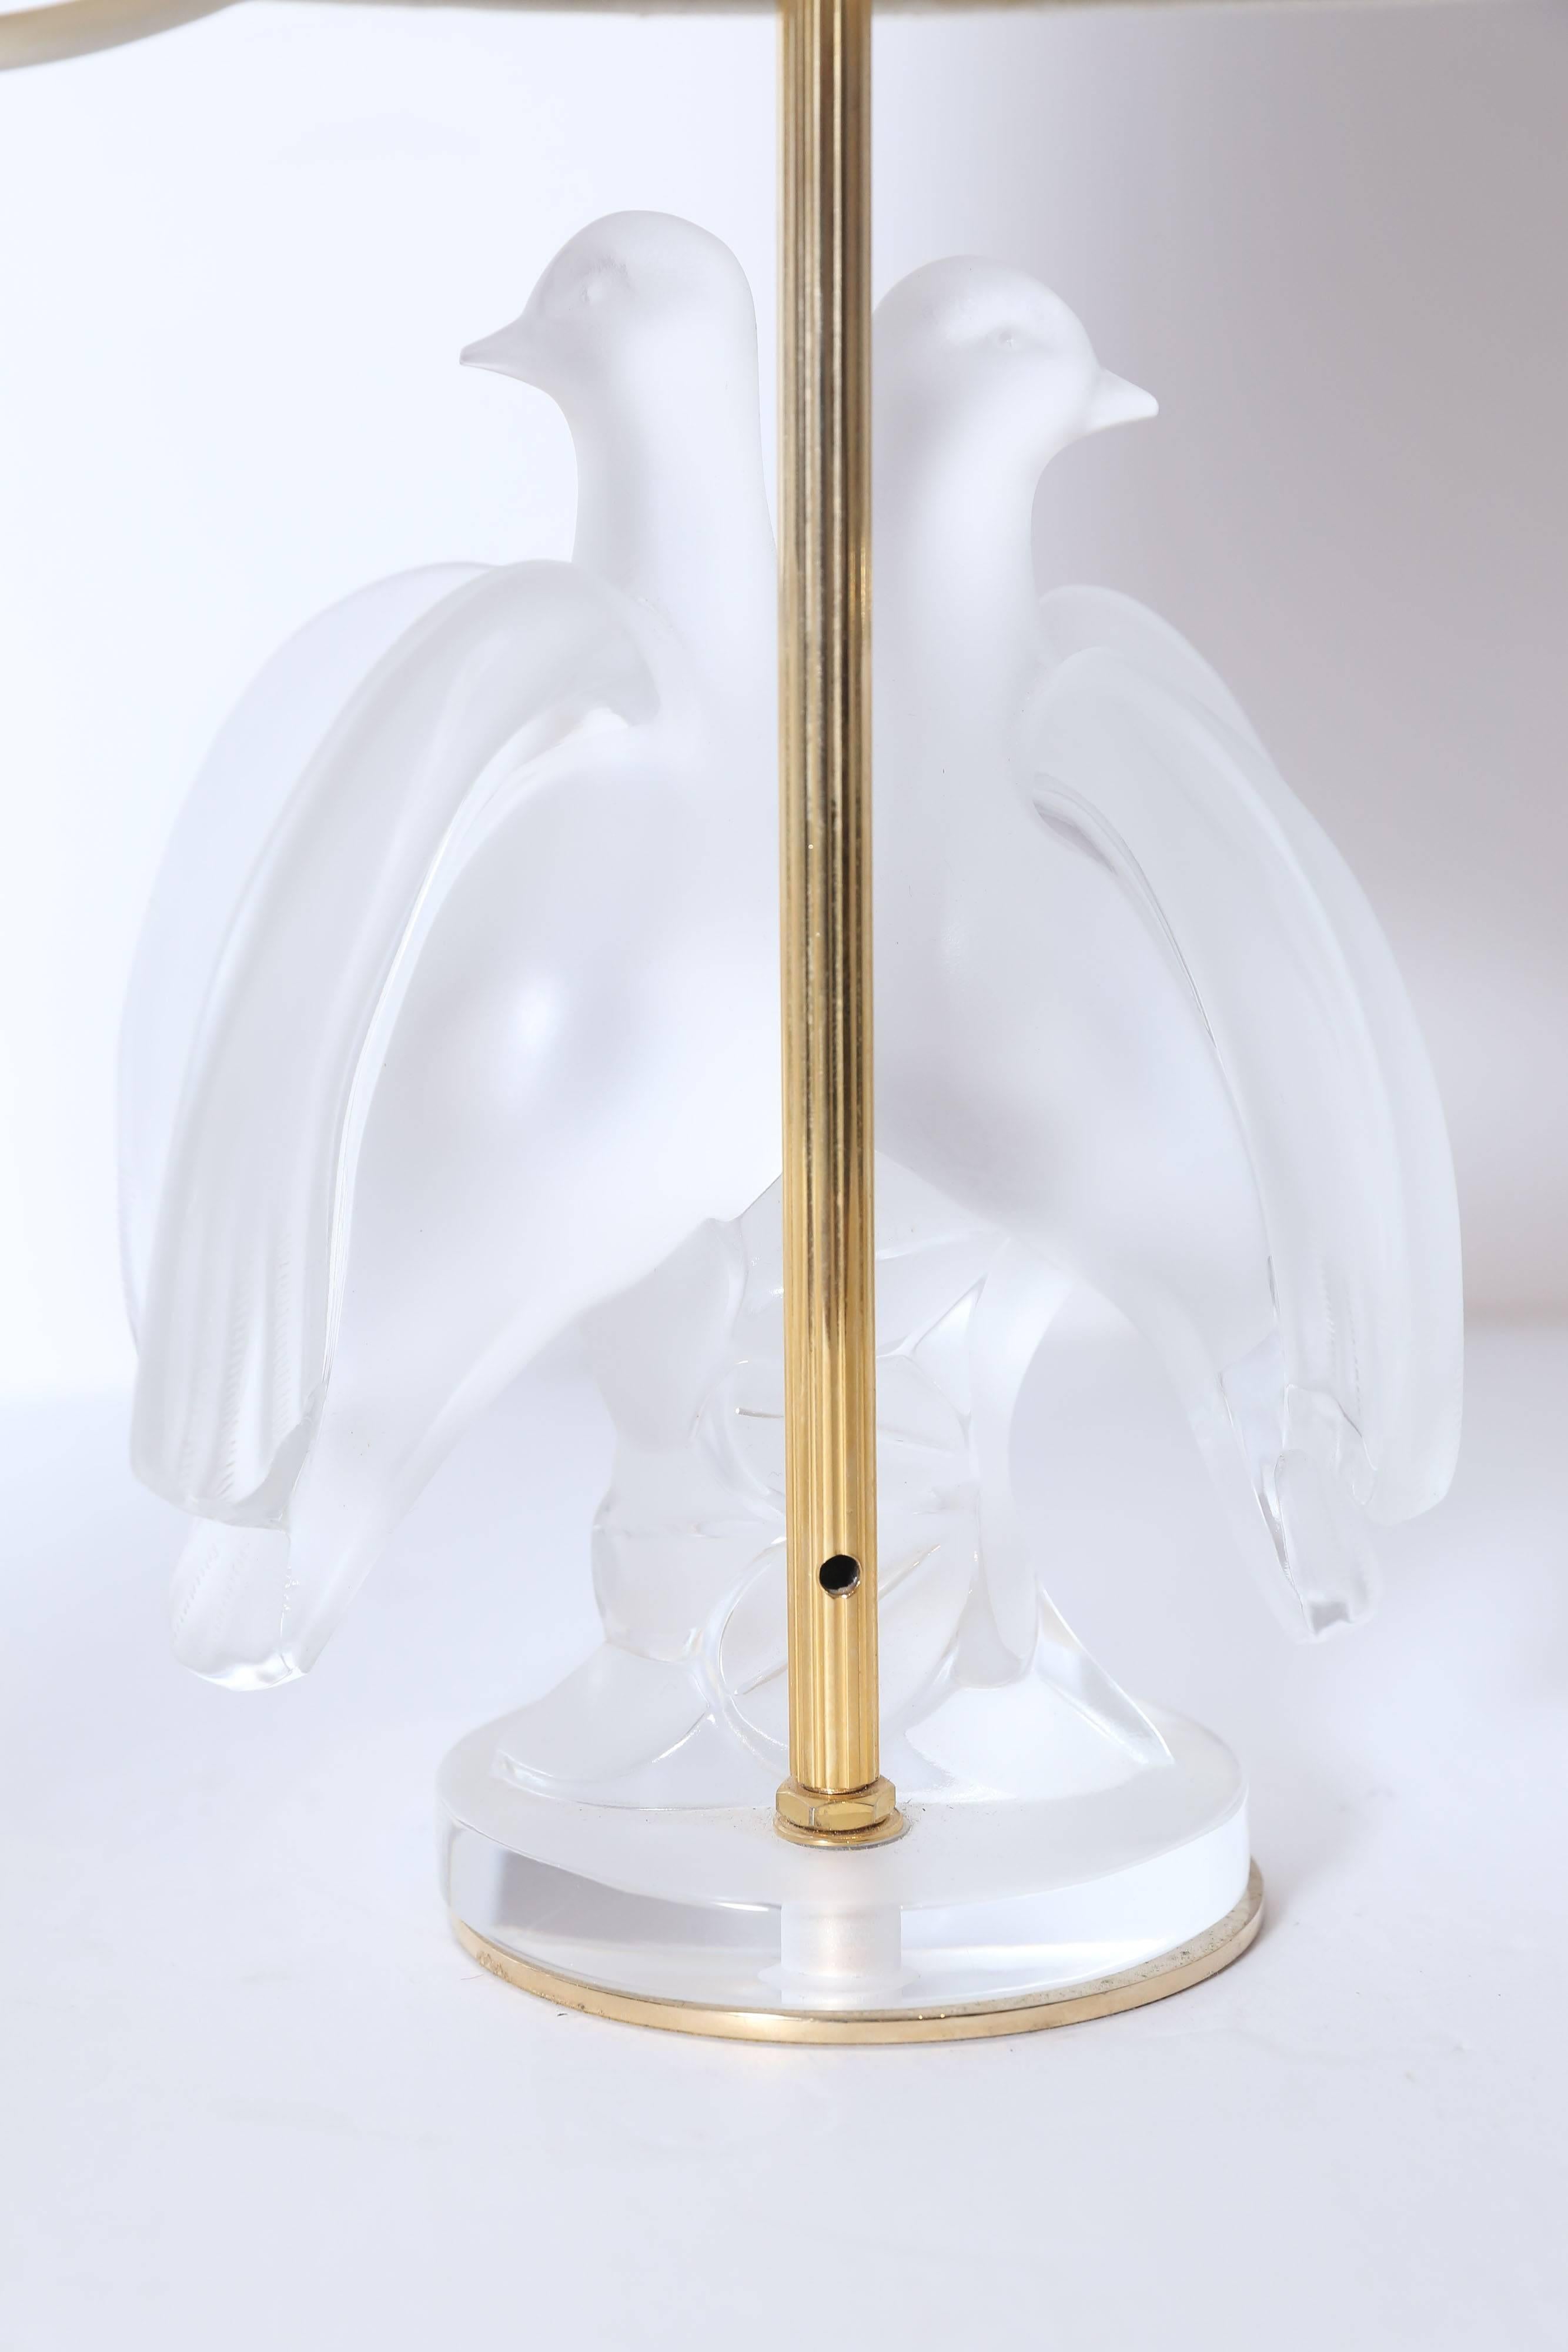 Designed by Marc Lalique and handcrafted in France.  Fashioned into an exquisite lamp.  It has graceful nature of clear crystal and sets the stage to showcase the masterful craftsmanship and the intricate design. Silk shade included.